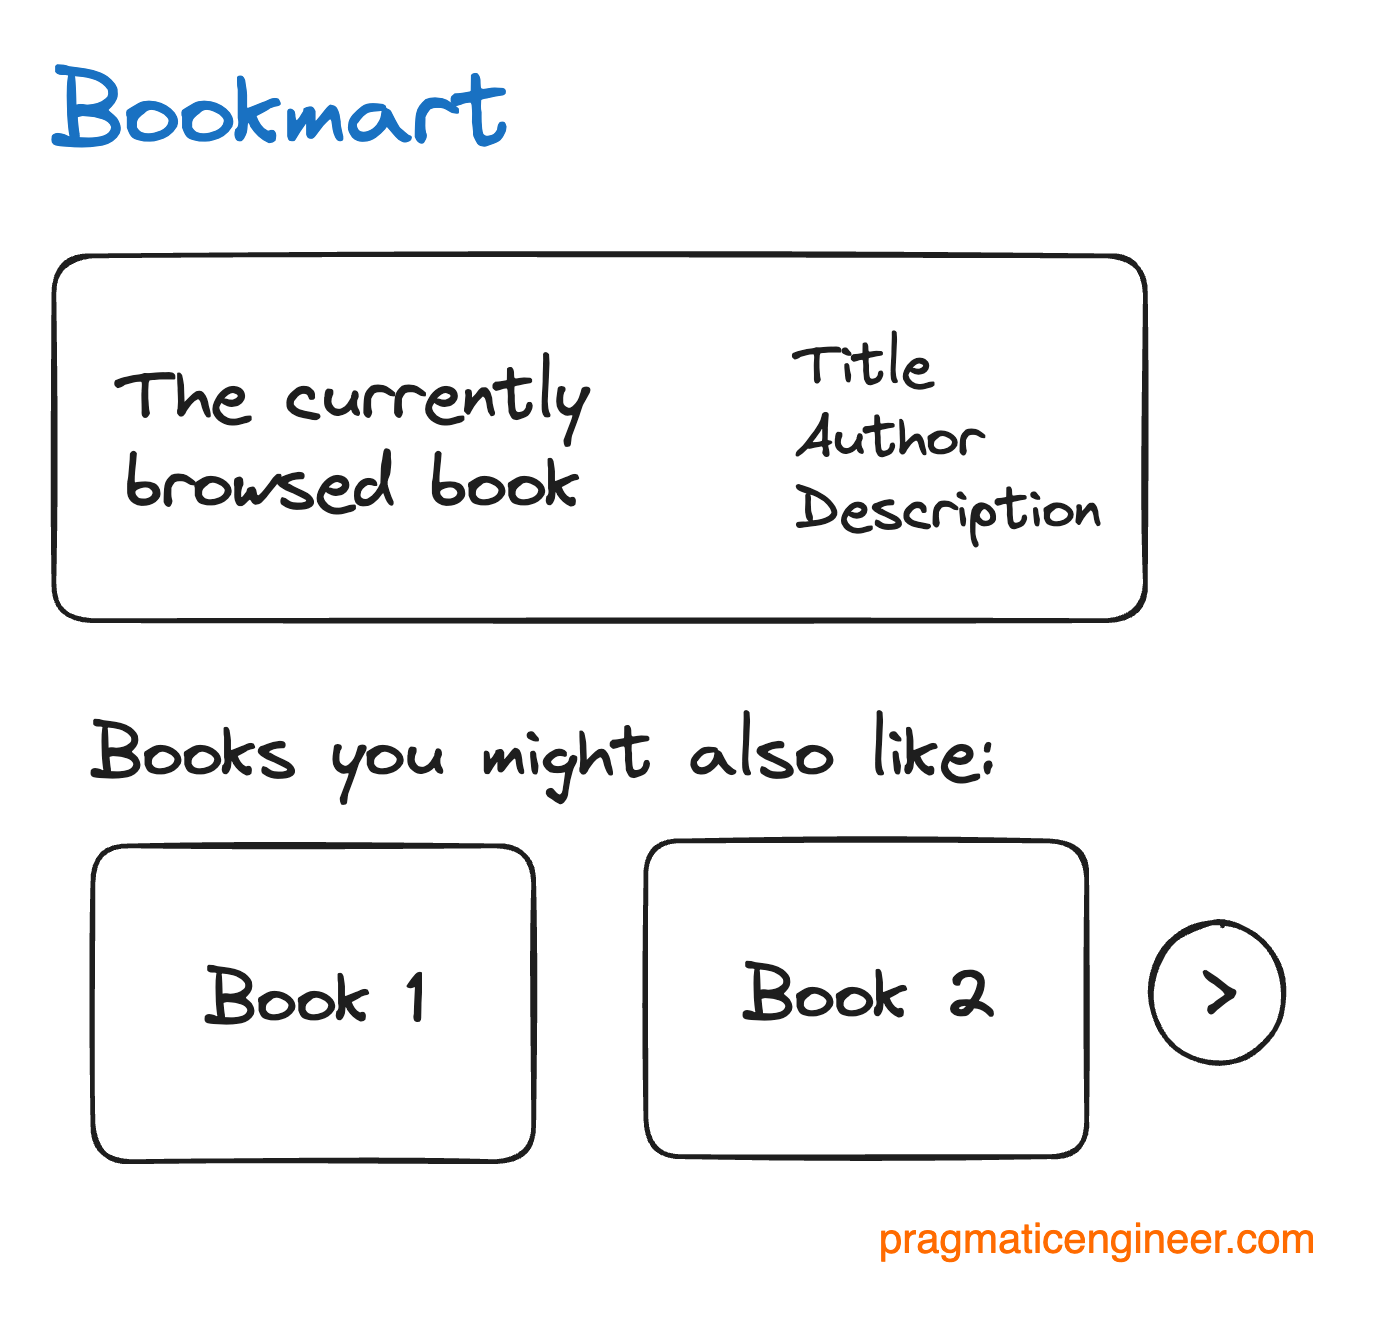 A UX mockup for the the “Books you might like” functionality we need to build